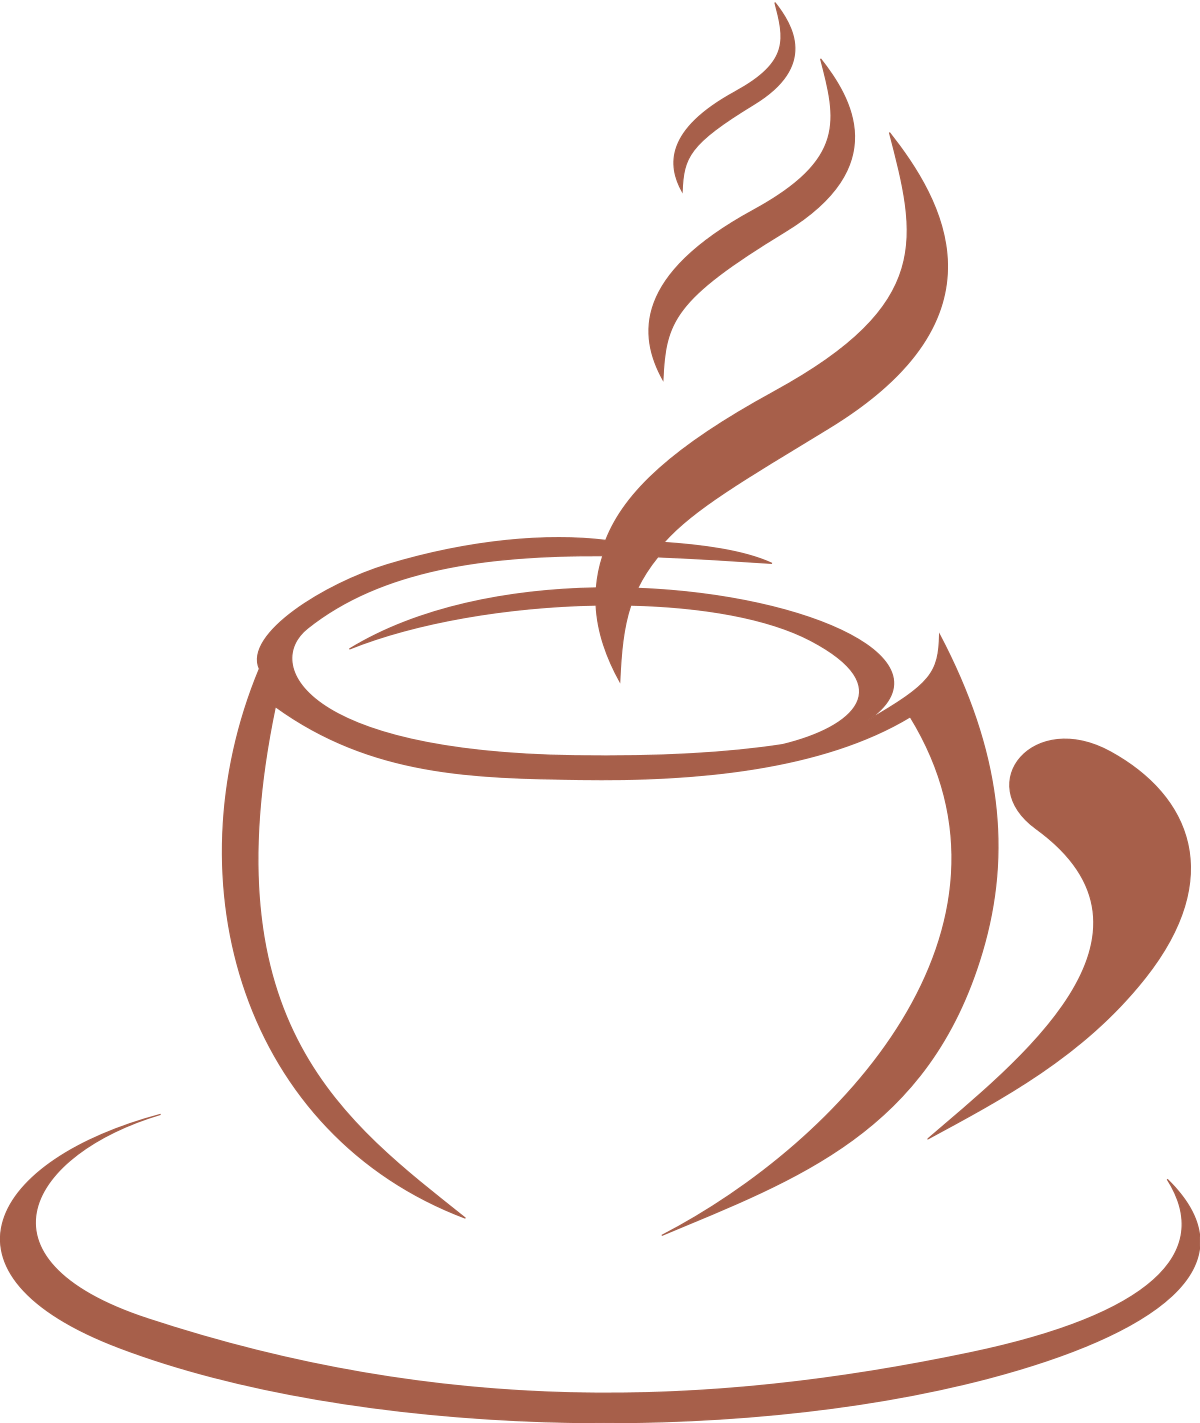 Download File:Coffee-2346113.svg - Wikimedia Commons